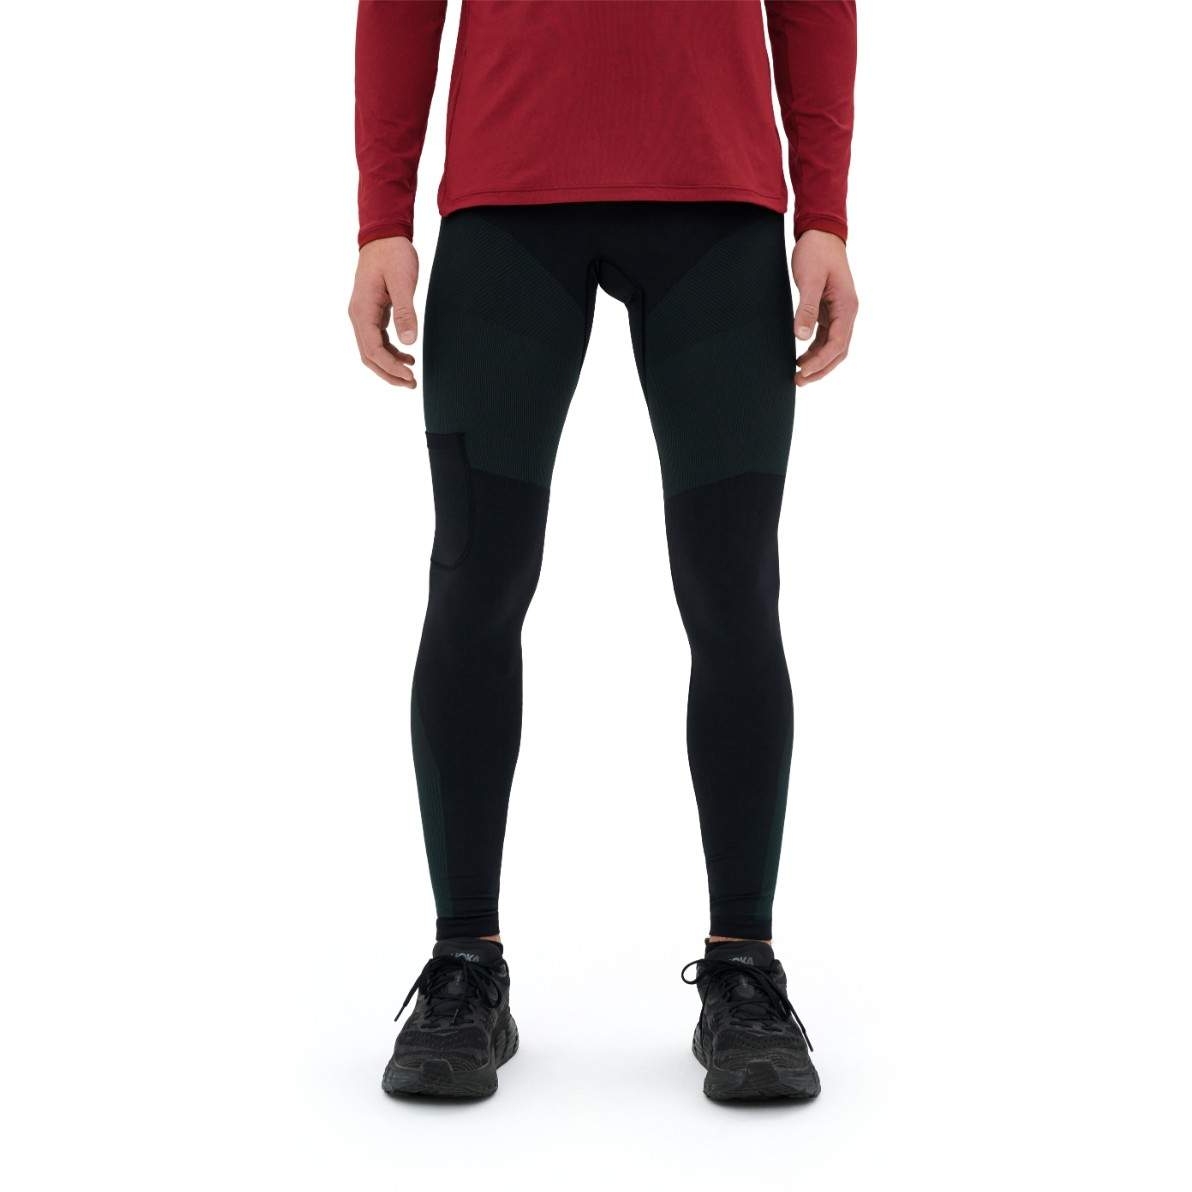 Picture of CEP The Run Seamless Tights Men - black